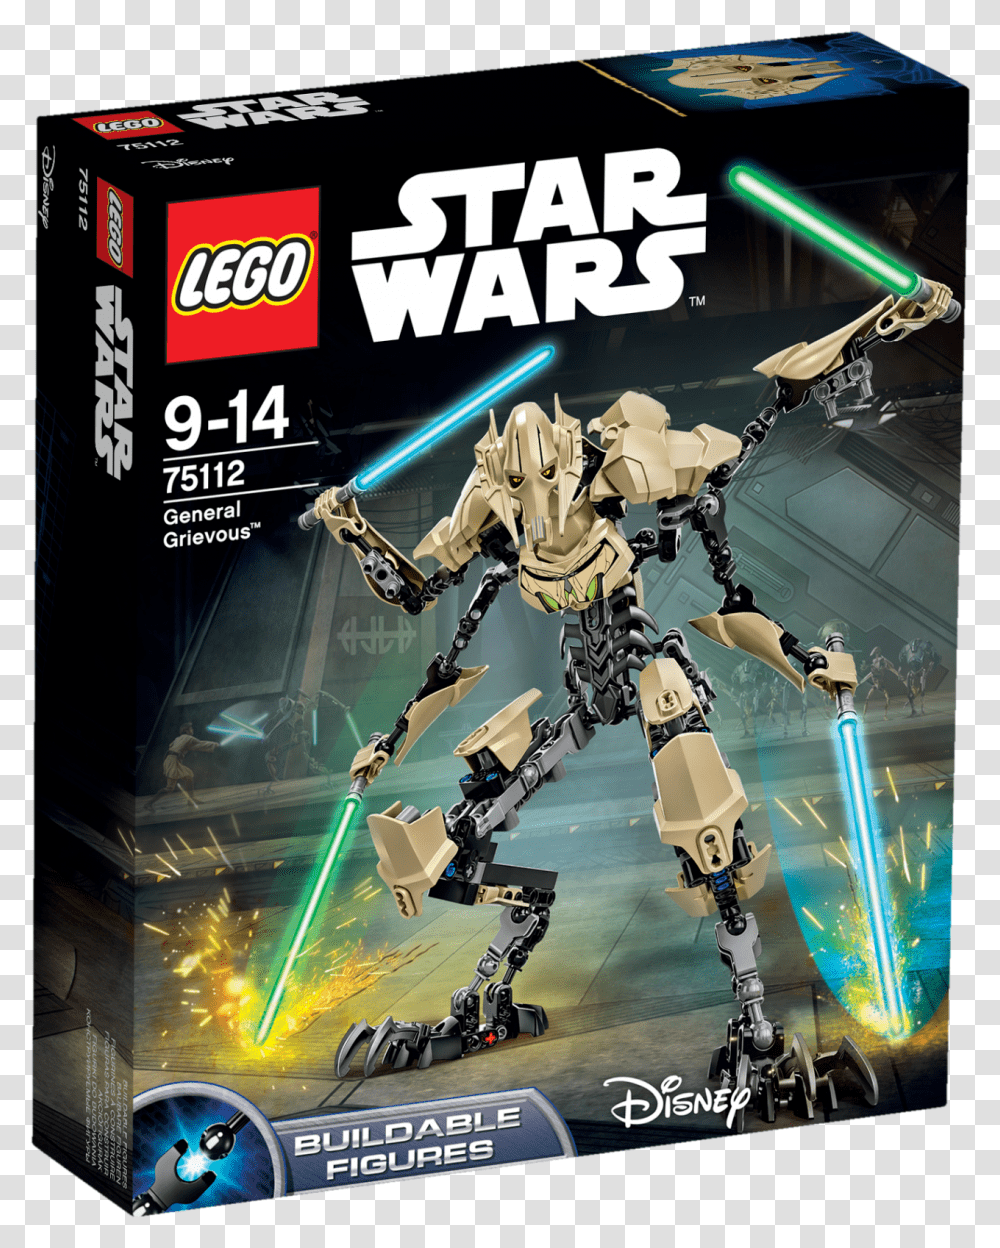 Lego Star Wars Toys General Grievous Download Star Wars Lego General Grievous, Robot, Poster Transparent Png